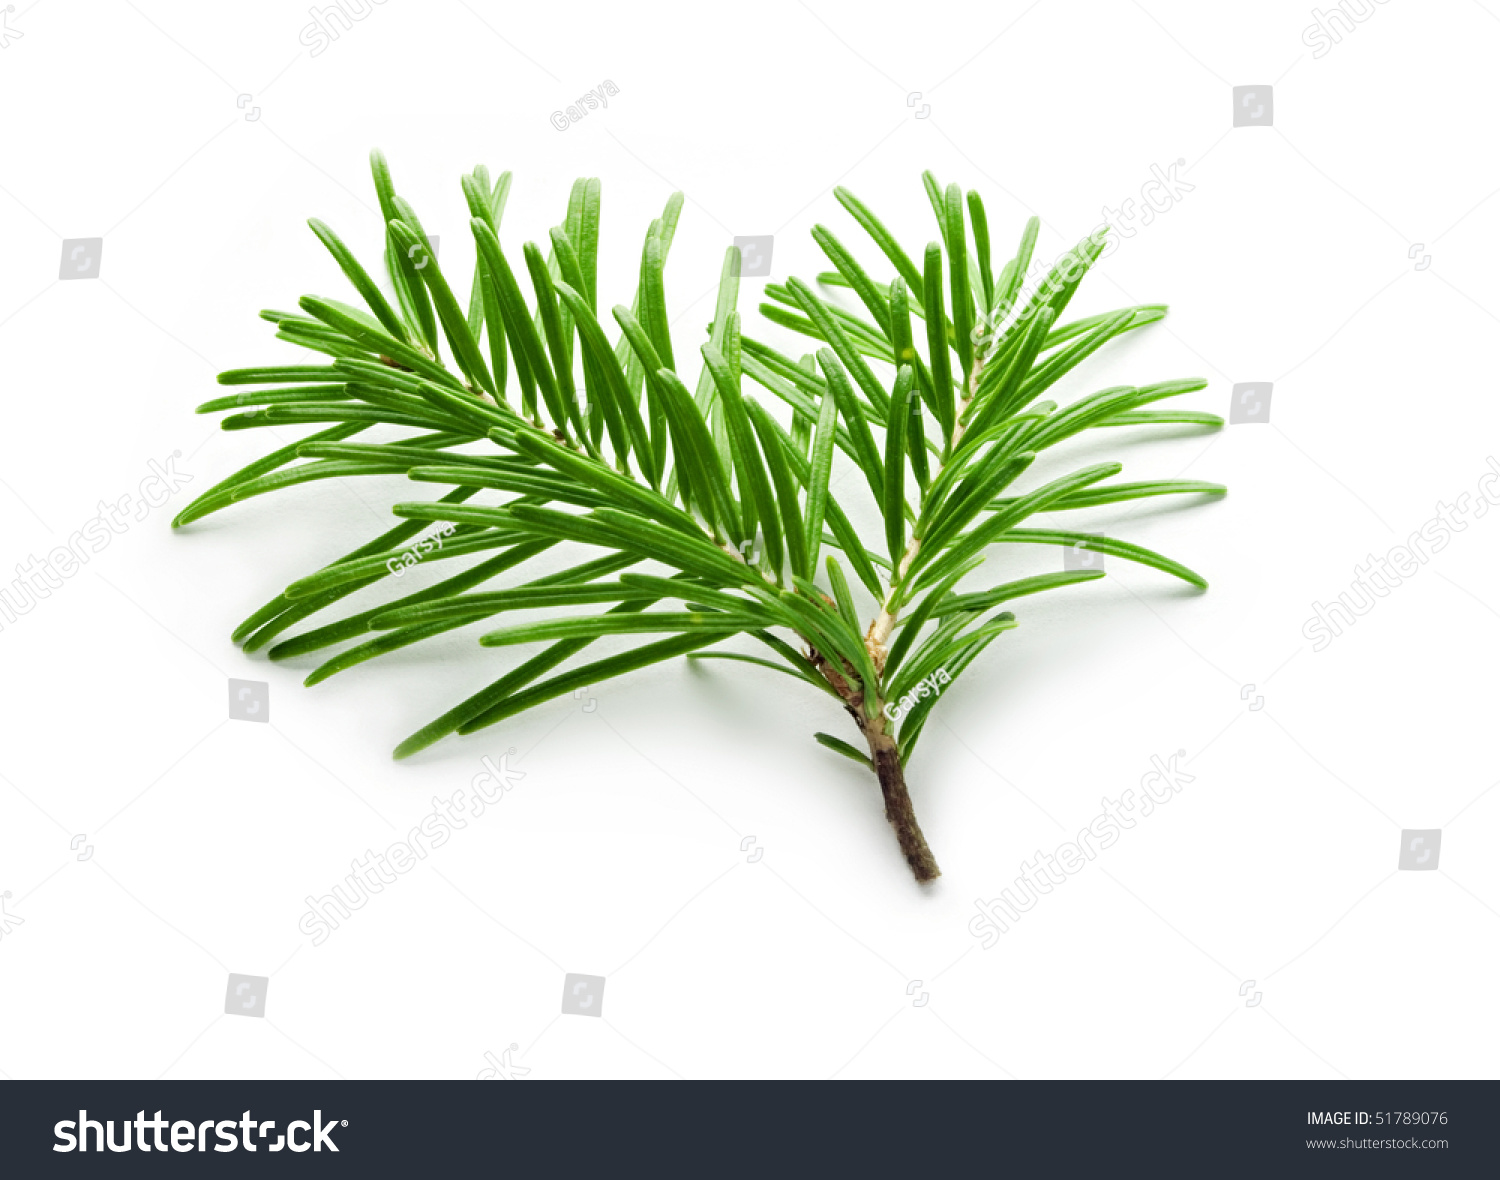 Fir Tree Branch Isolated On White Stock Photo 51789076 : Shutterstock